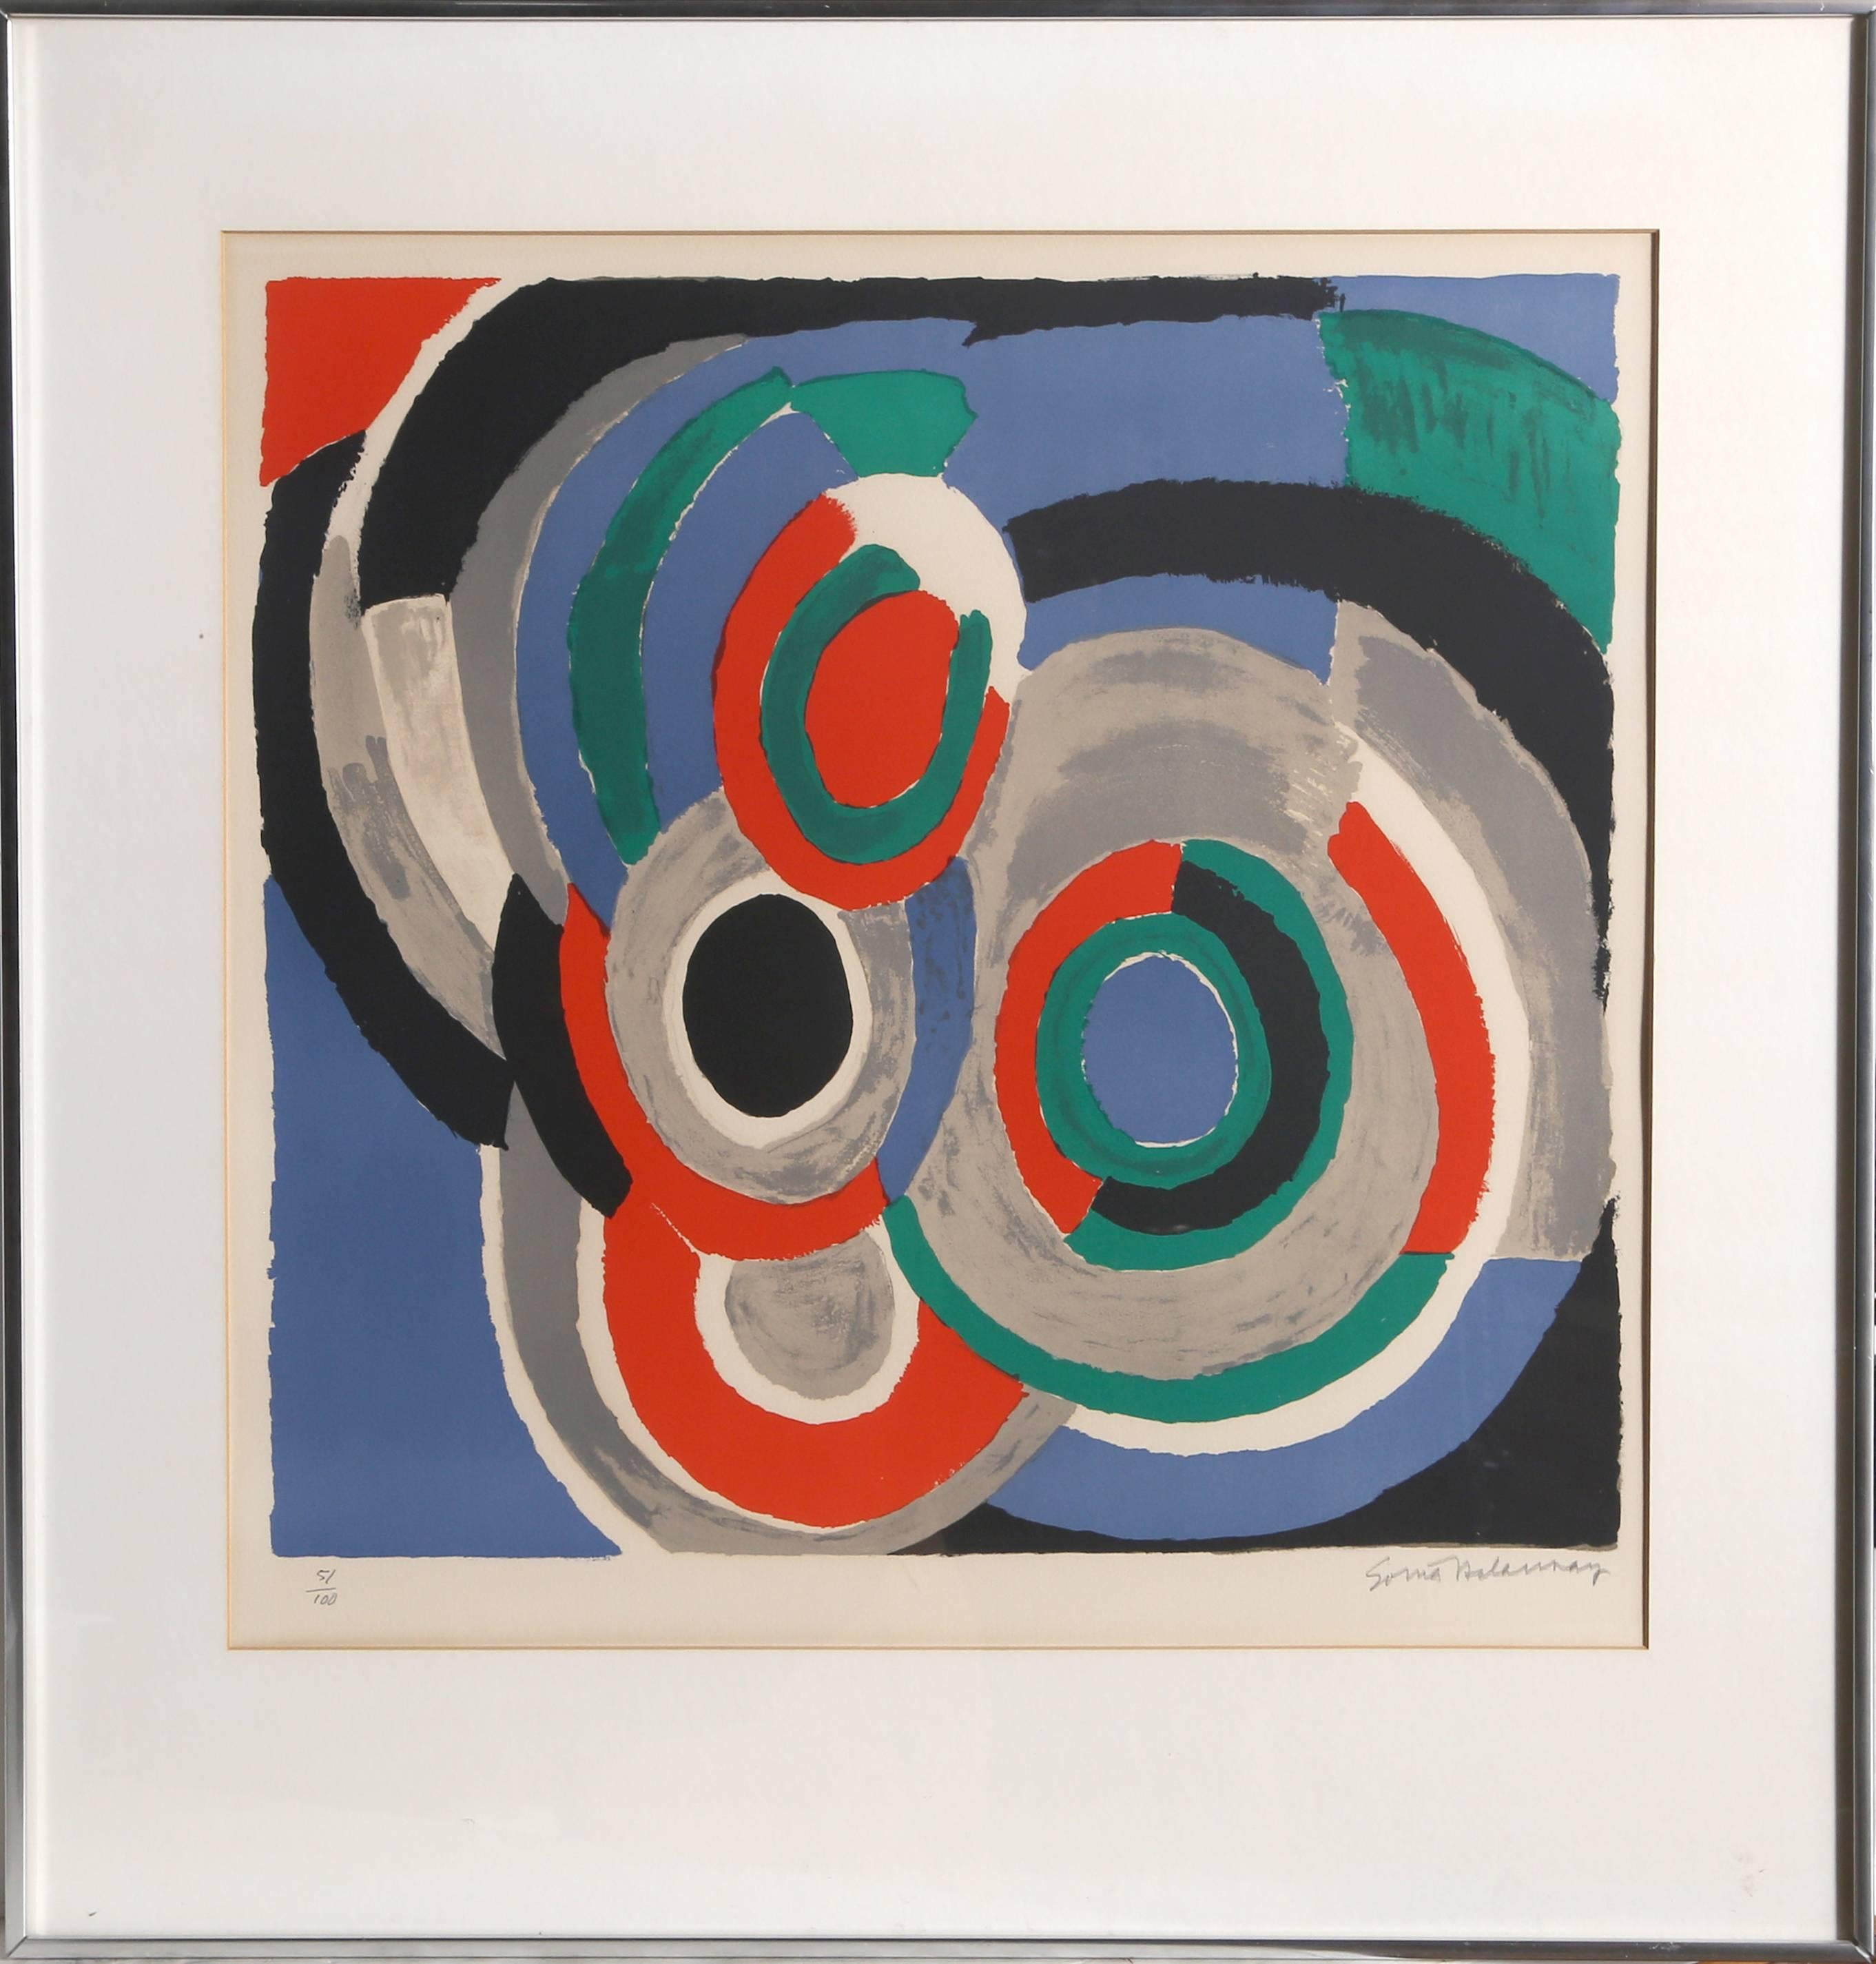 Sonia Delaunay Abstract Print - Hommage a Stravinsky